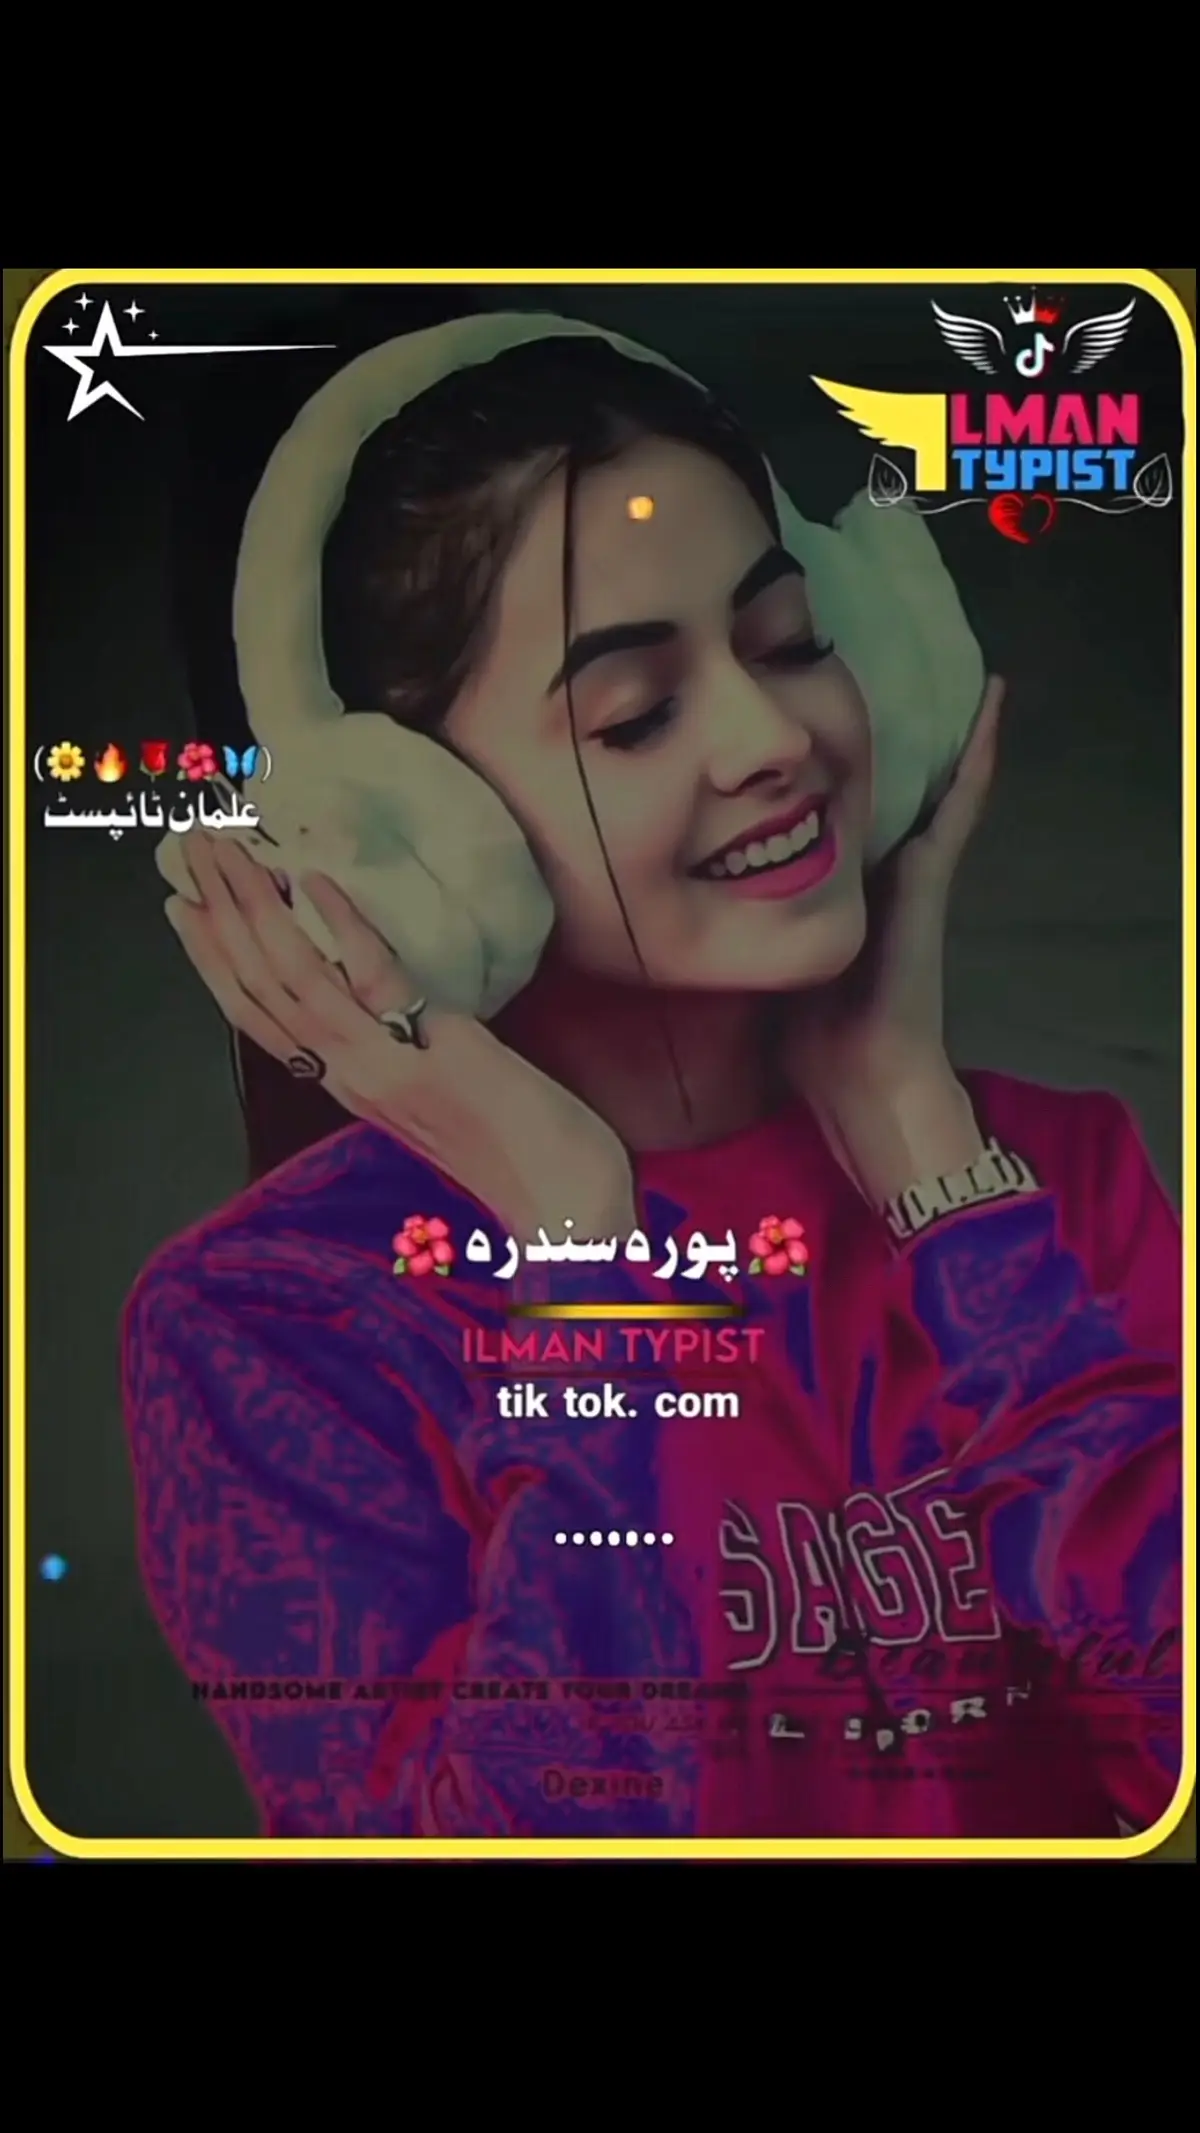 🔥#Pashto#song#🔥پشتو#سونگ🔥 #Viral#TikTok#palz#viral #video #New#account#palz#viral#song #Tik#tok#viral#song#palz#viral #Me#new#account#palz#video  #accounts#for#youforpage#flypシ  #youforpage😍 